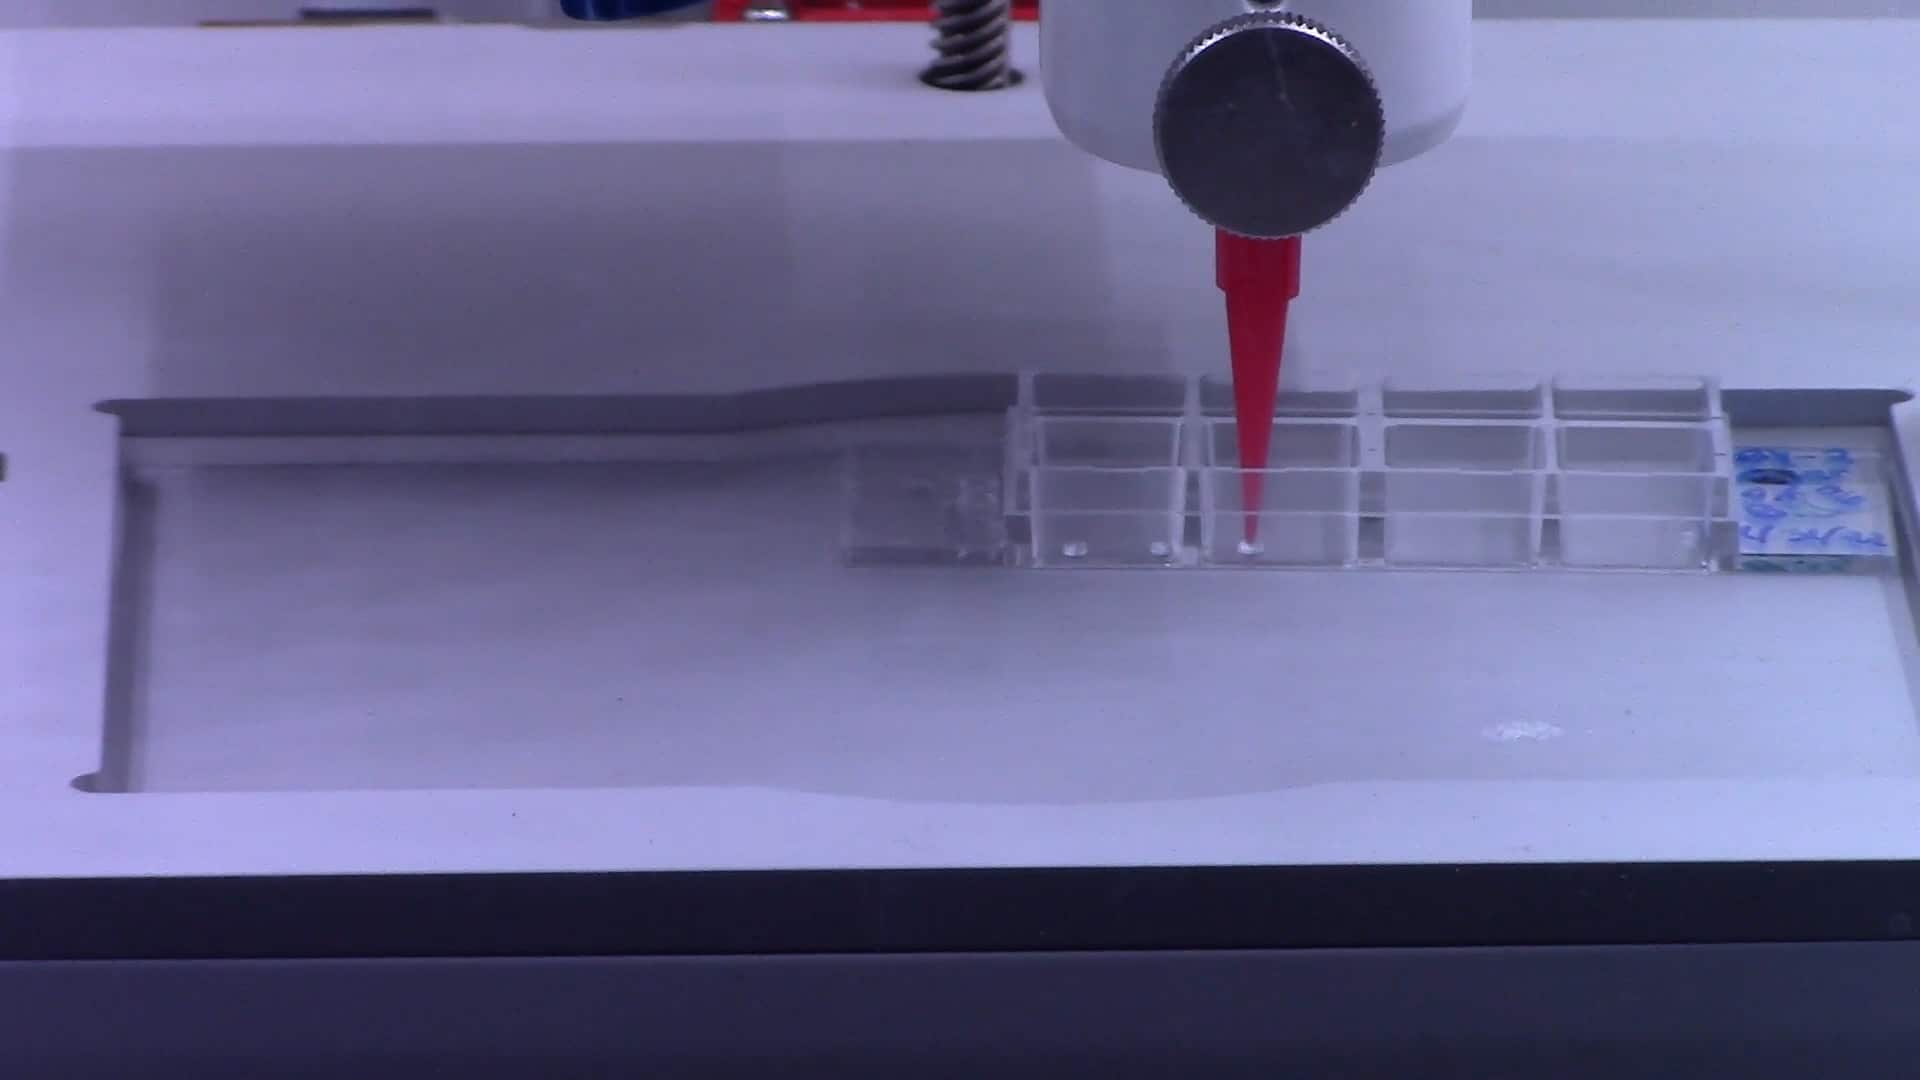 Plant cells are bioprinted by a 3D printer